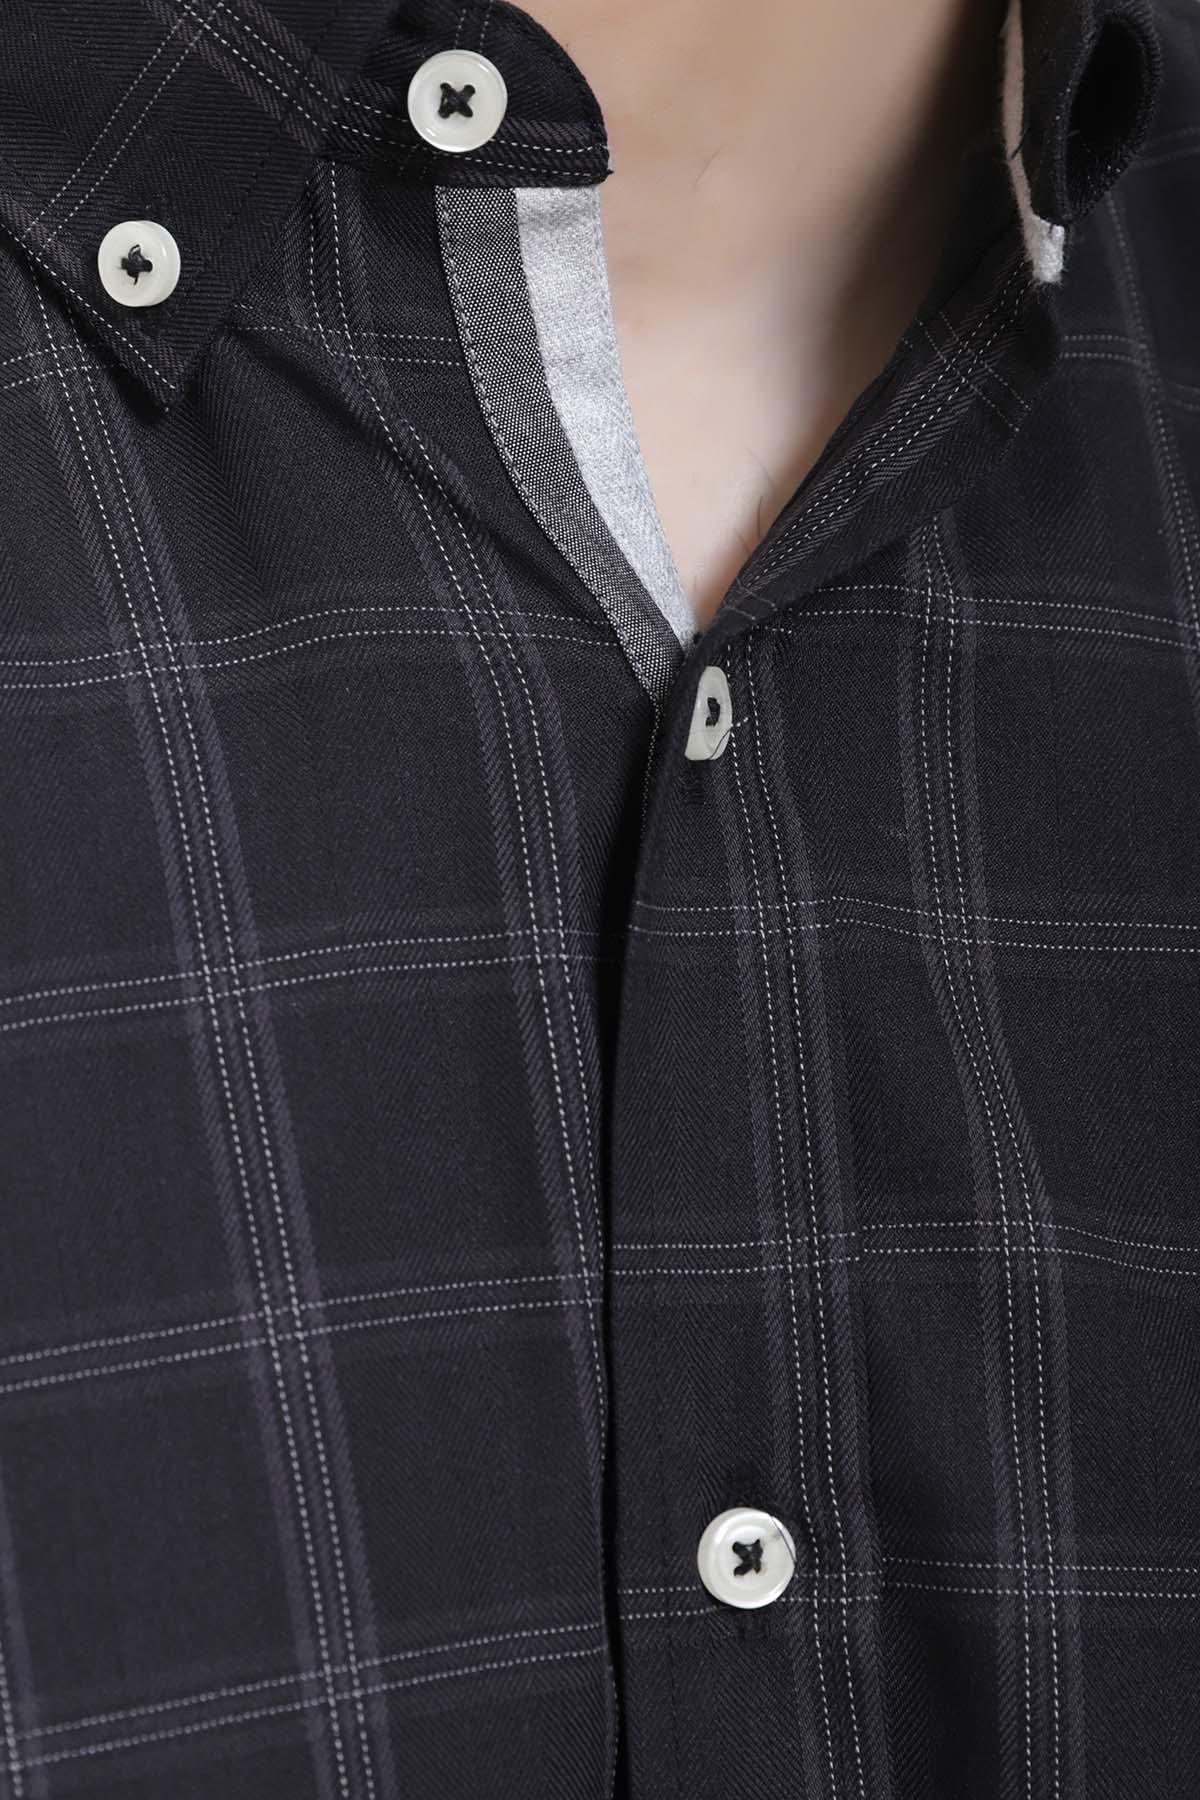 SEMI FORMAL SHIRTS BUTTON DOWN FULL SLEEVE BLACK at Charcoal Clothing